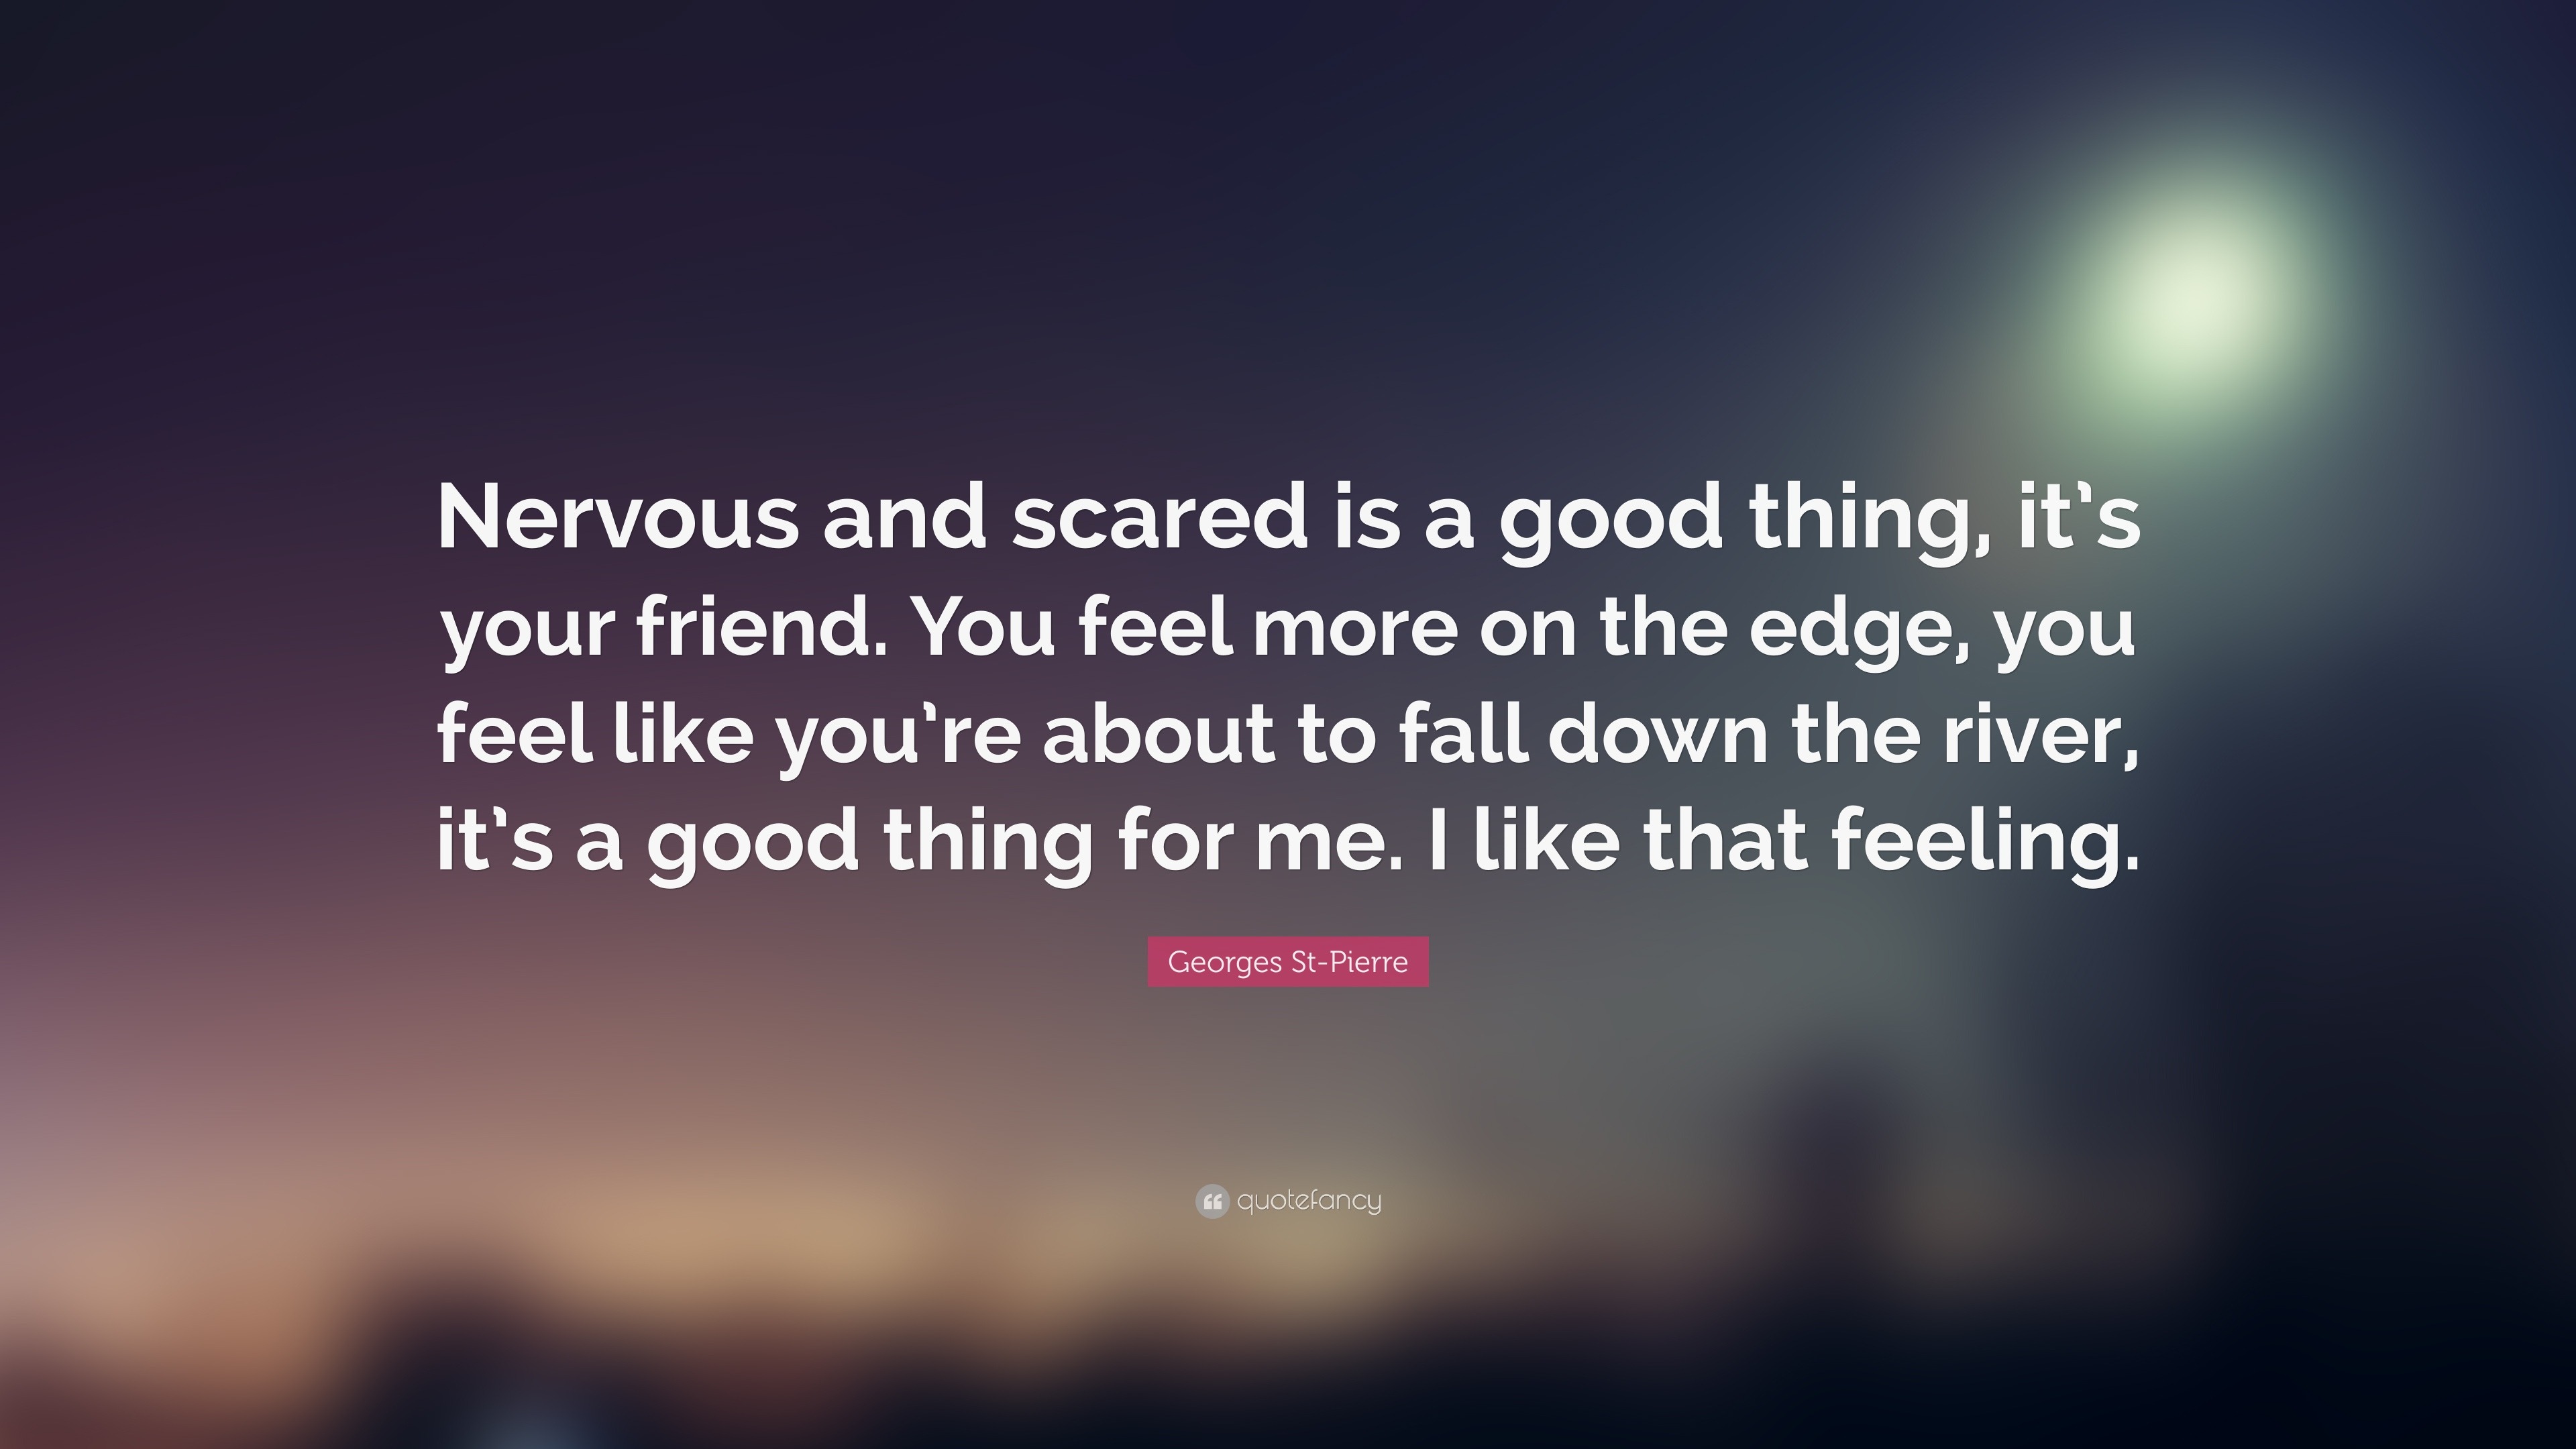 https://quotefancy.com/media/wallpaper/3840x2160/819629-Georges-St-Pierre-Quote-Nervous-and-scared-is-a-good-thing-it-s.jpg